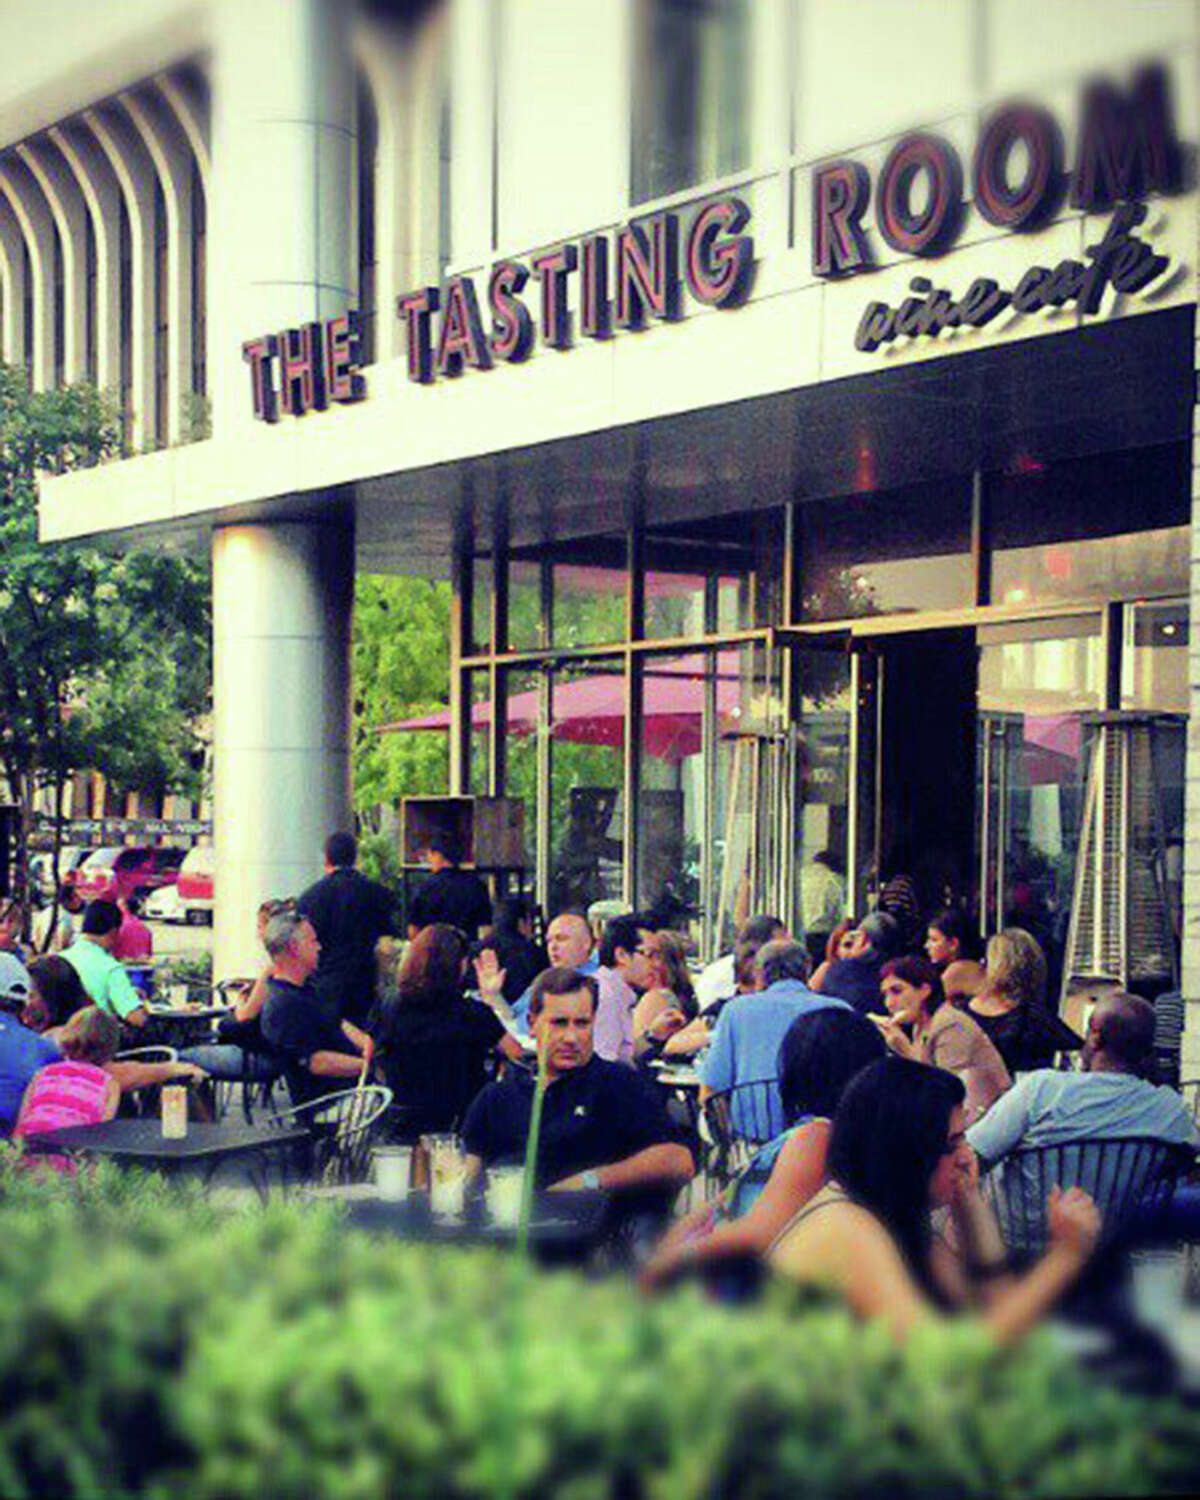 The Tasting Room wine bar and restaurant will close at CityCentre on Aug. 27.